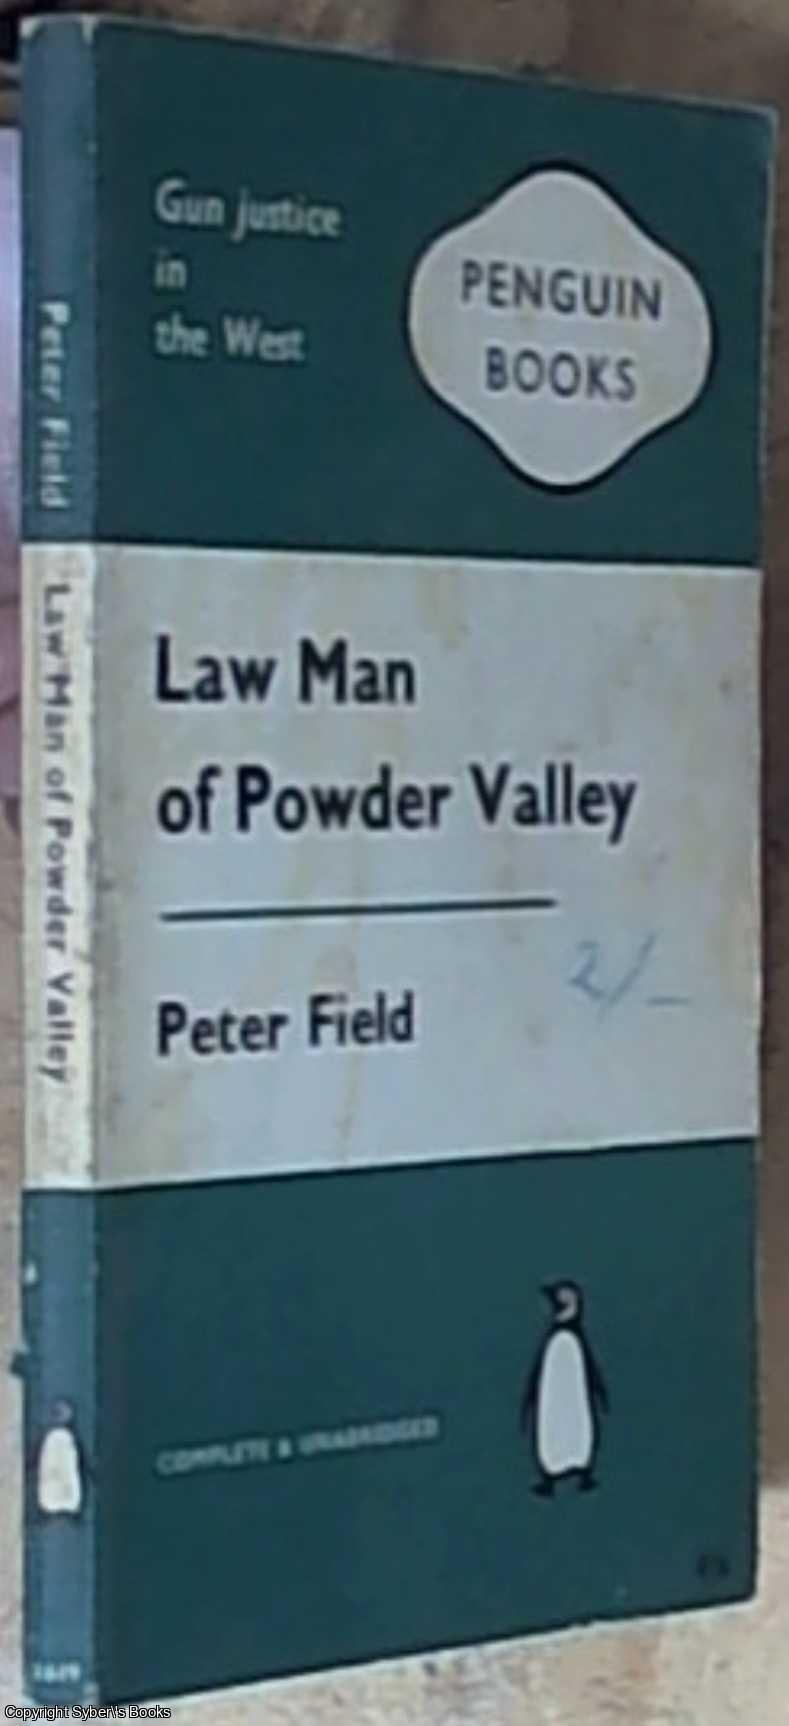 Field, Peter - Law Man of Powder Valley